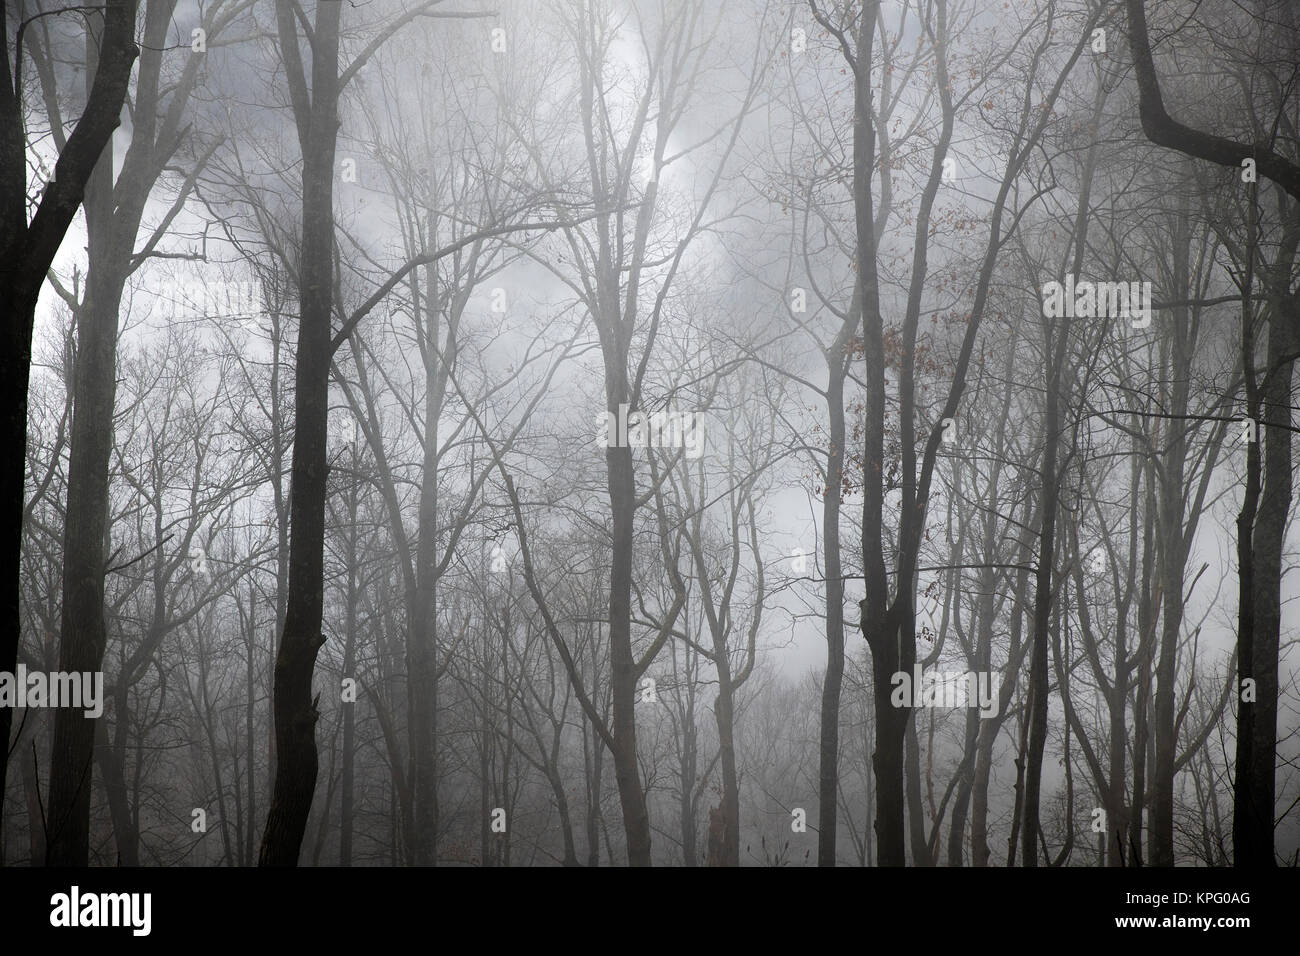 Winter forest shrouded in mist, North Carolina, USA. Stock Photo